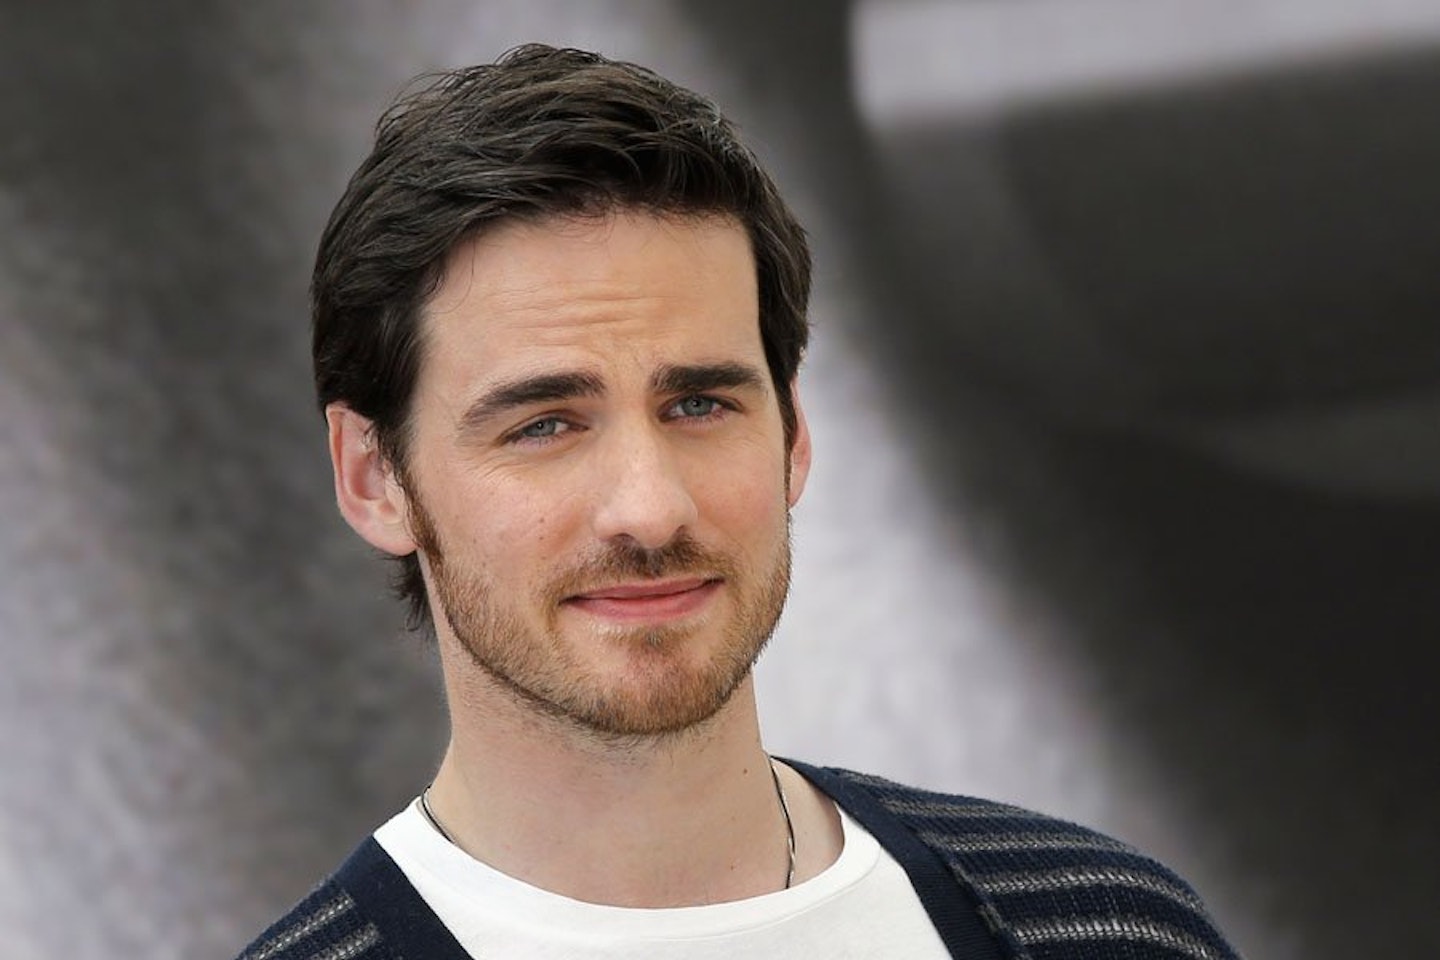 Colin O'Donoghue, actor (Once Upon a Time)